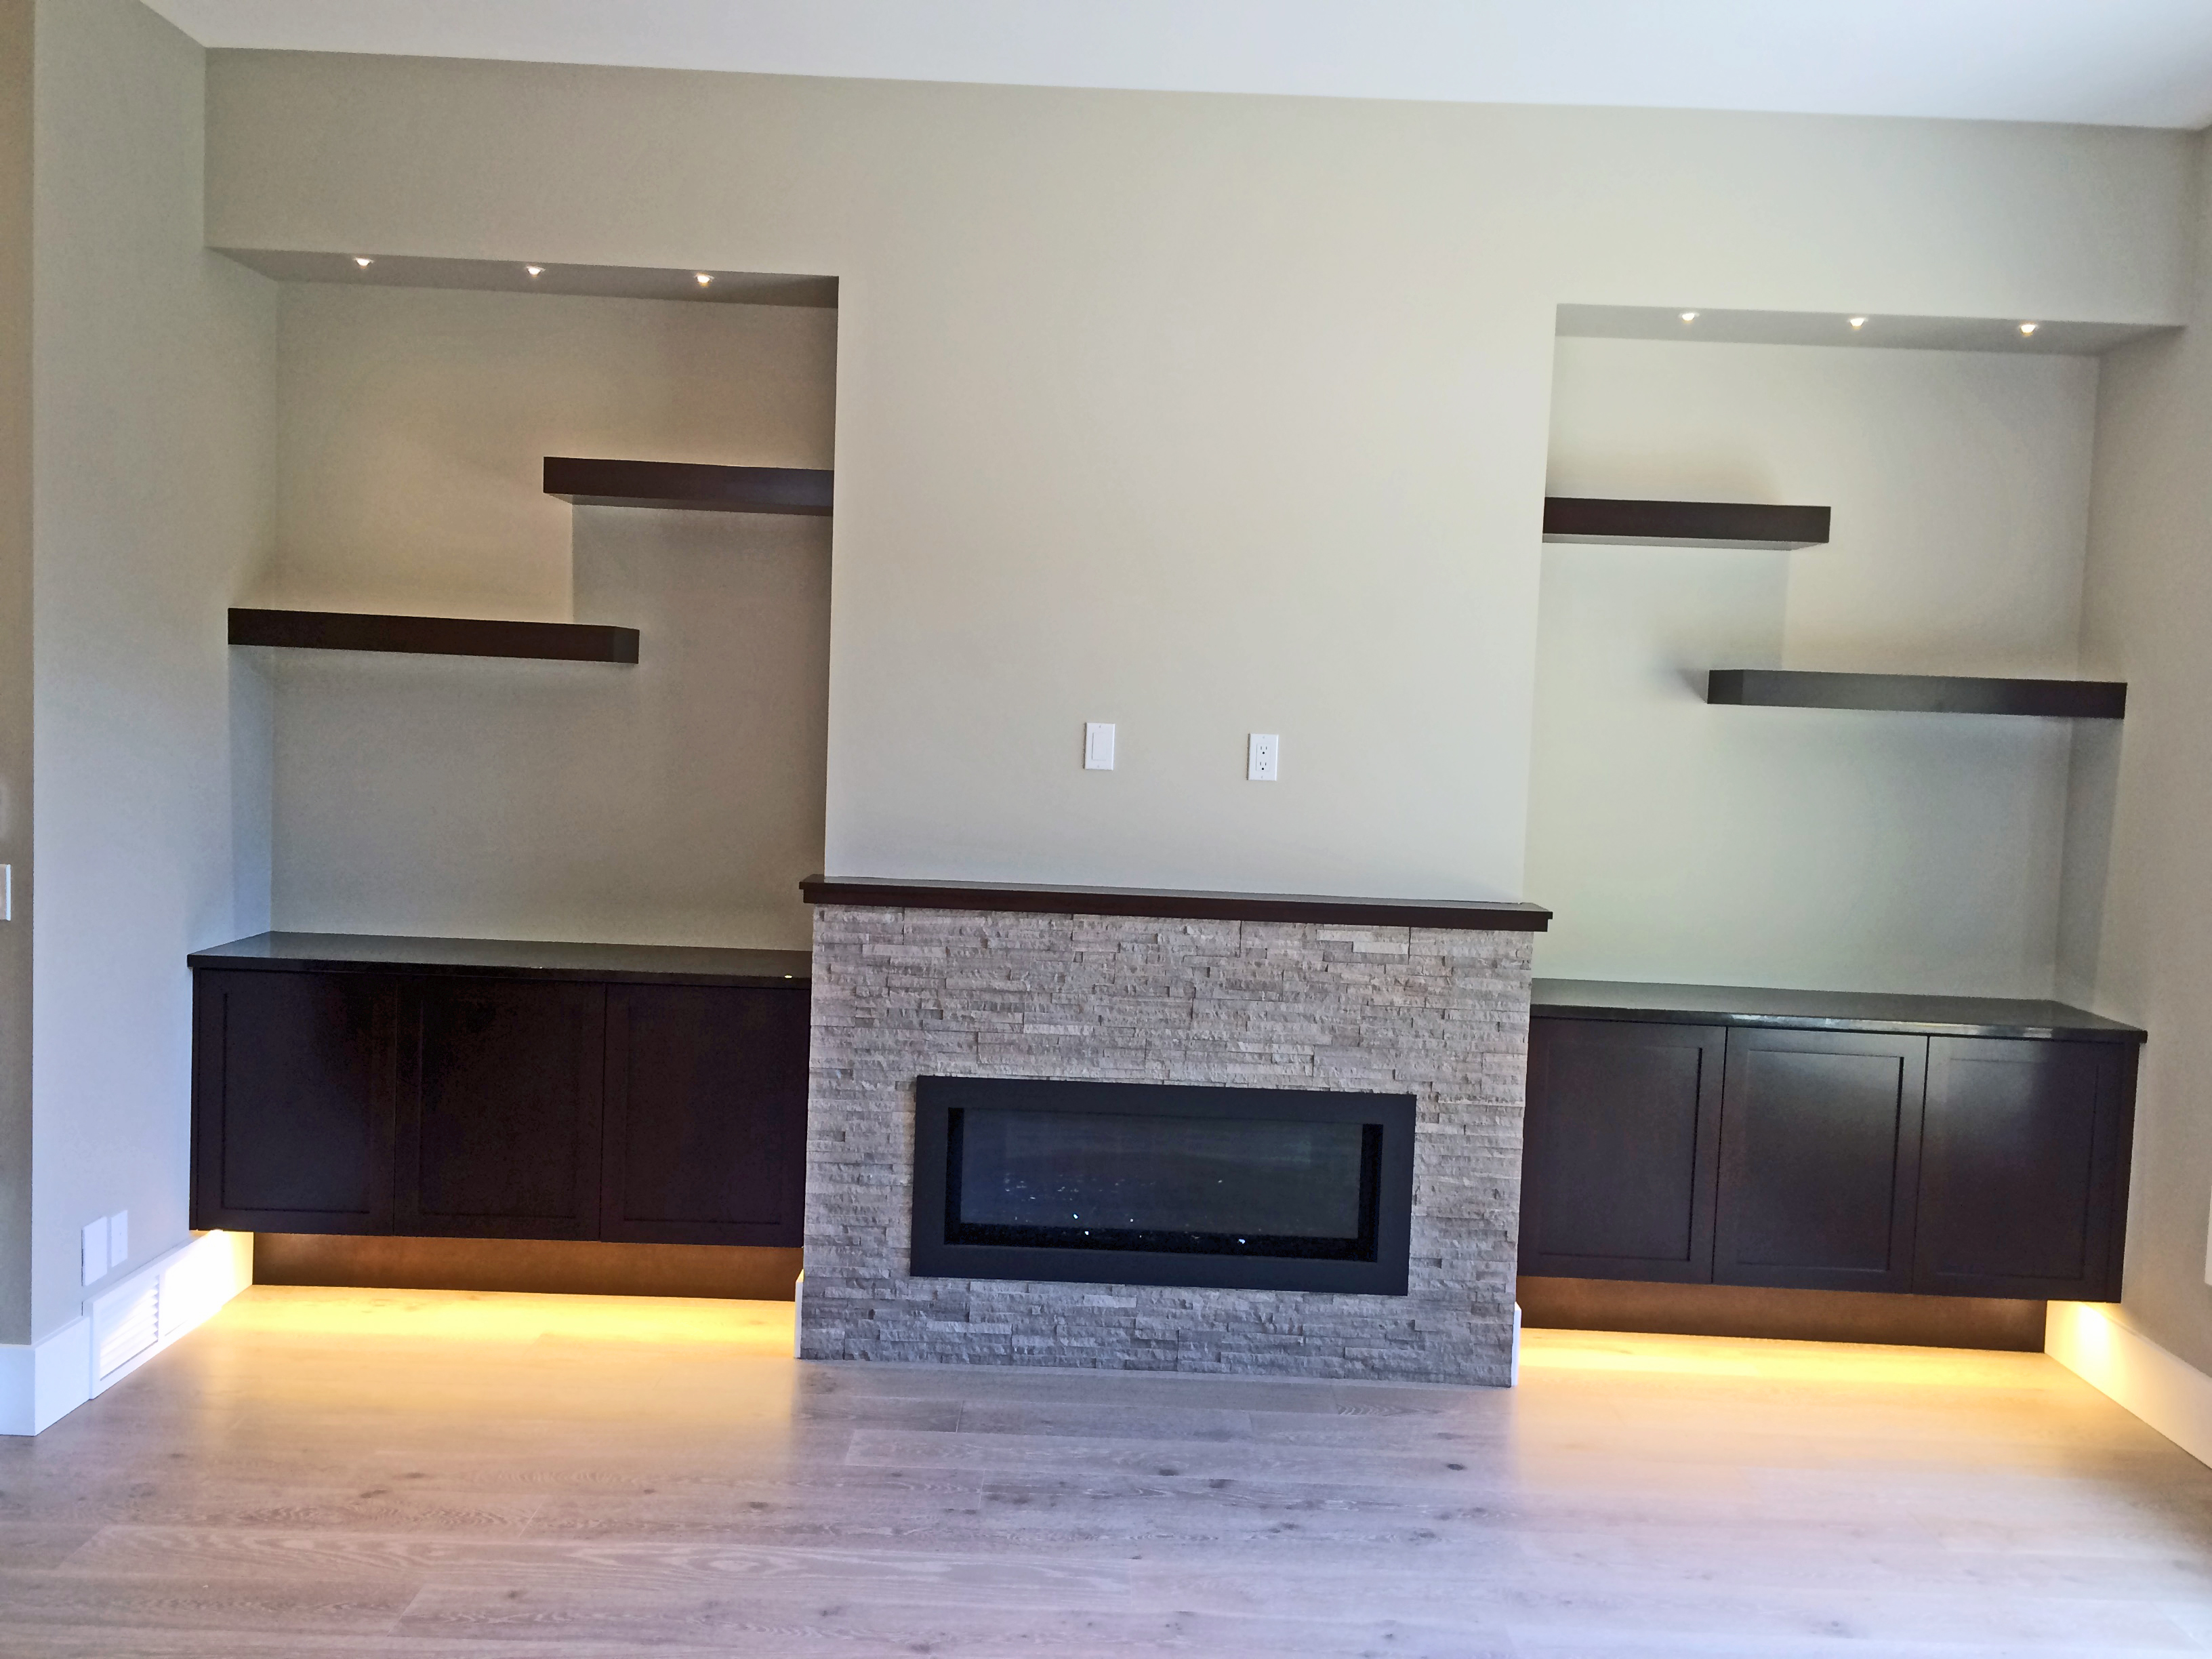 Calgary Inner-City Infill - Great Room Fireplace and Shelving